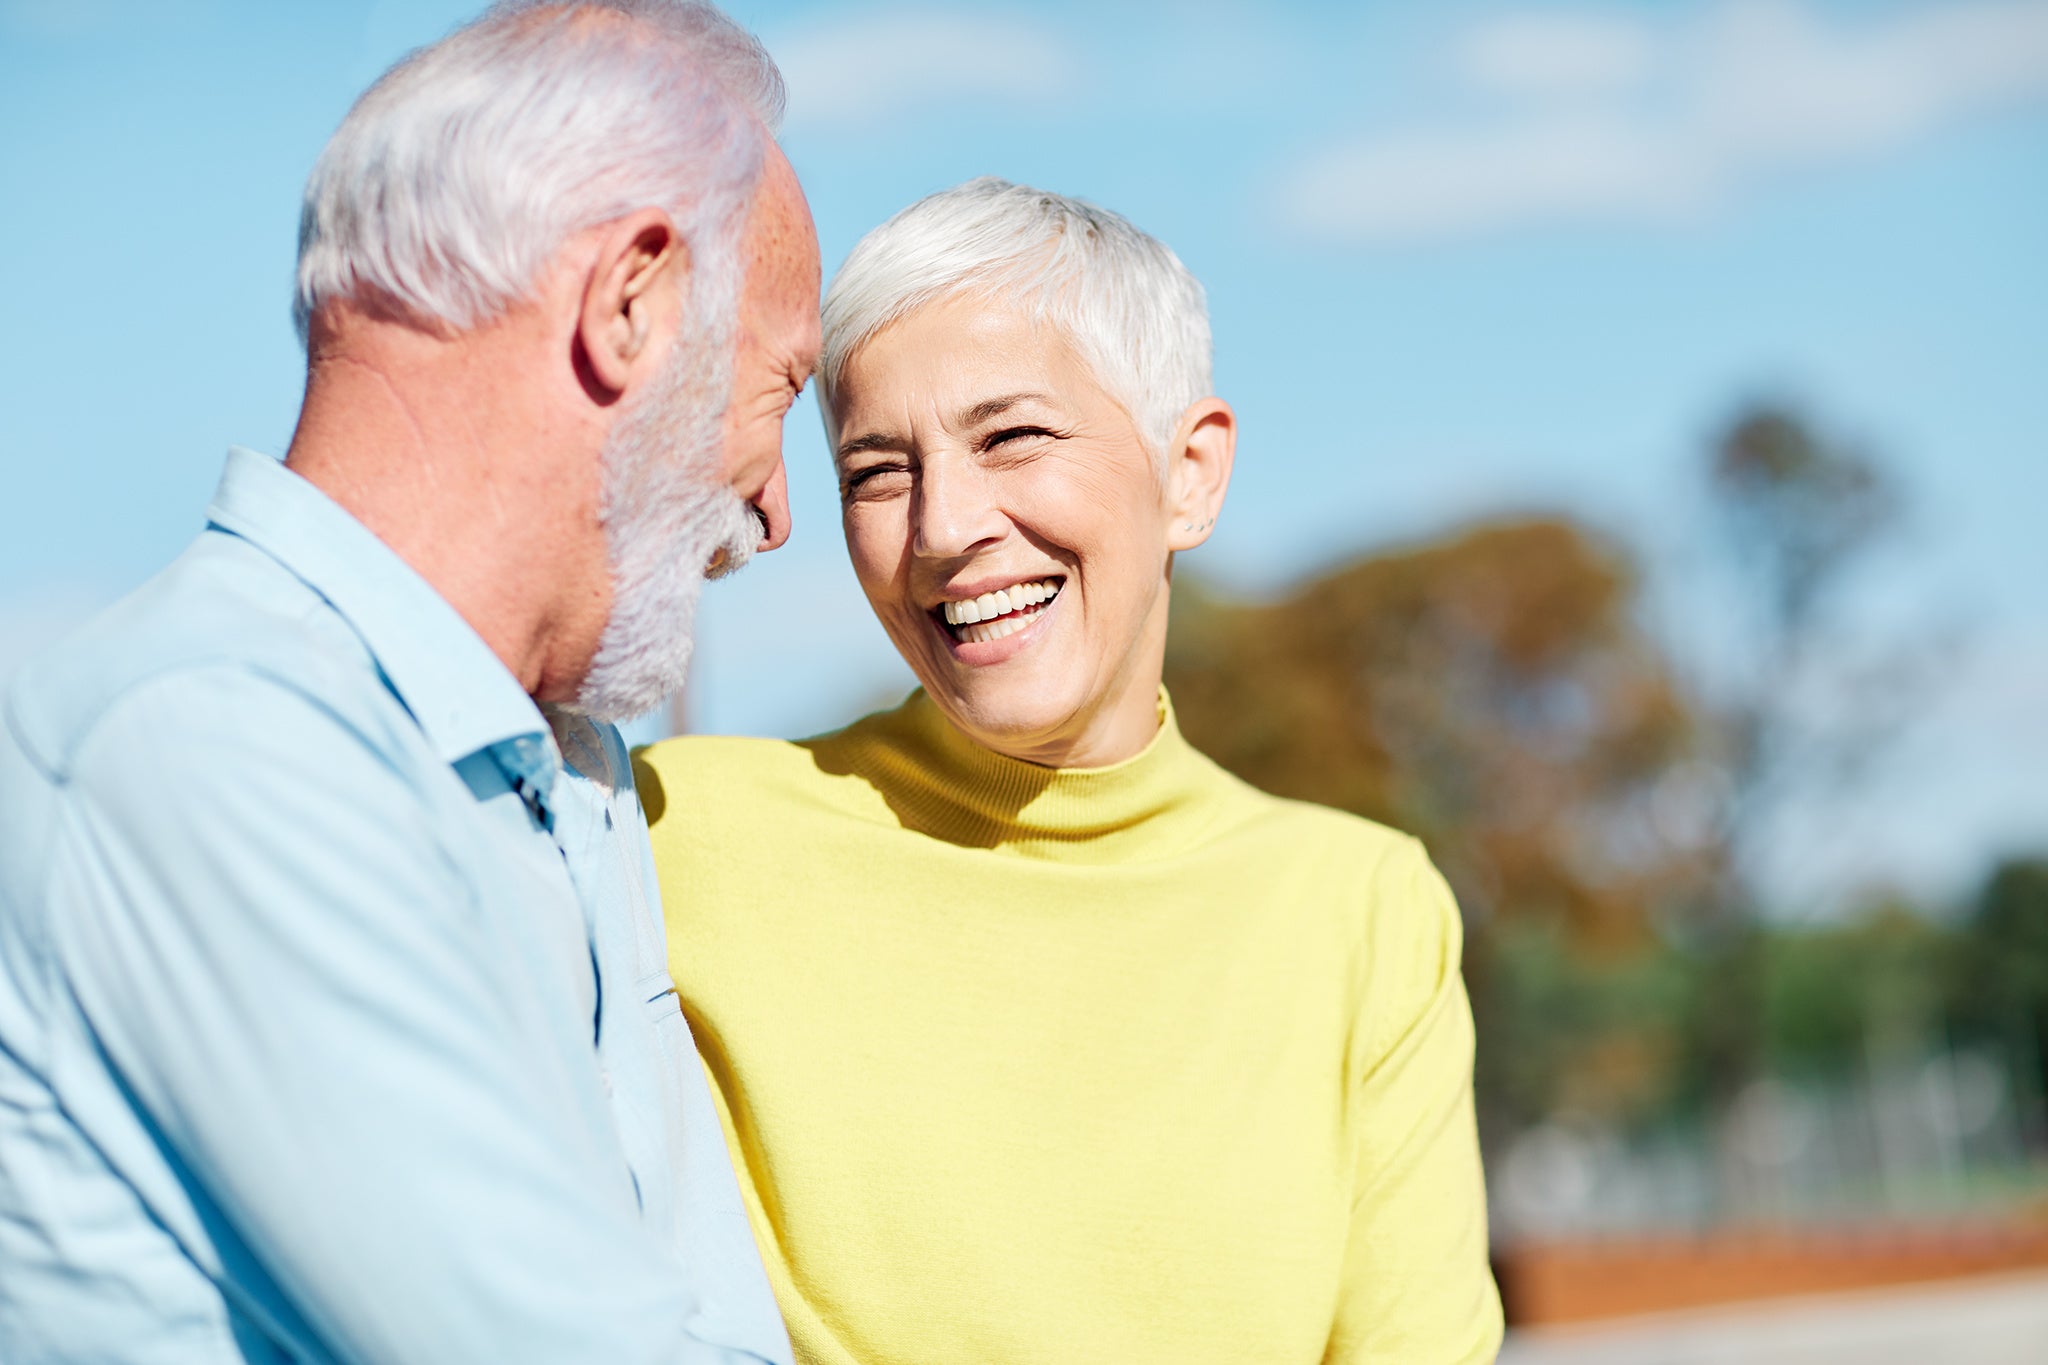 Mature Oral Health: How to Care for Teeth as You Age 